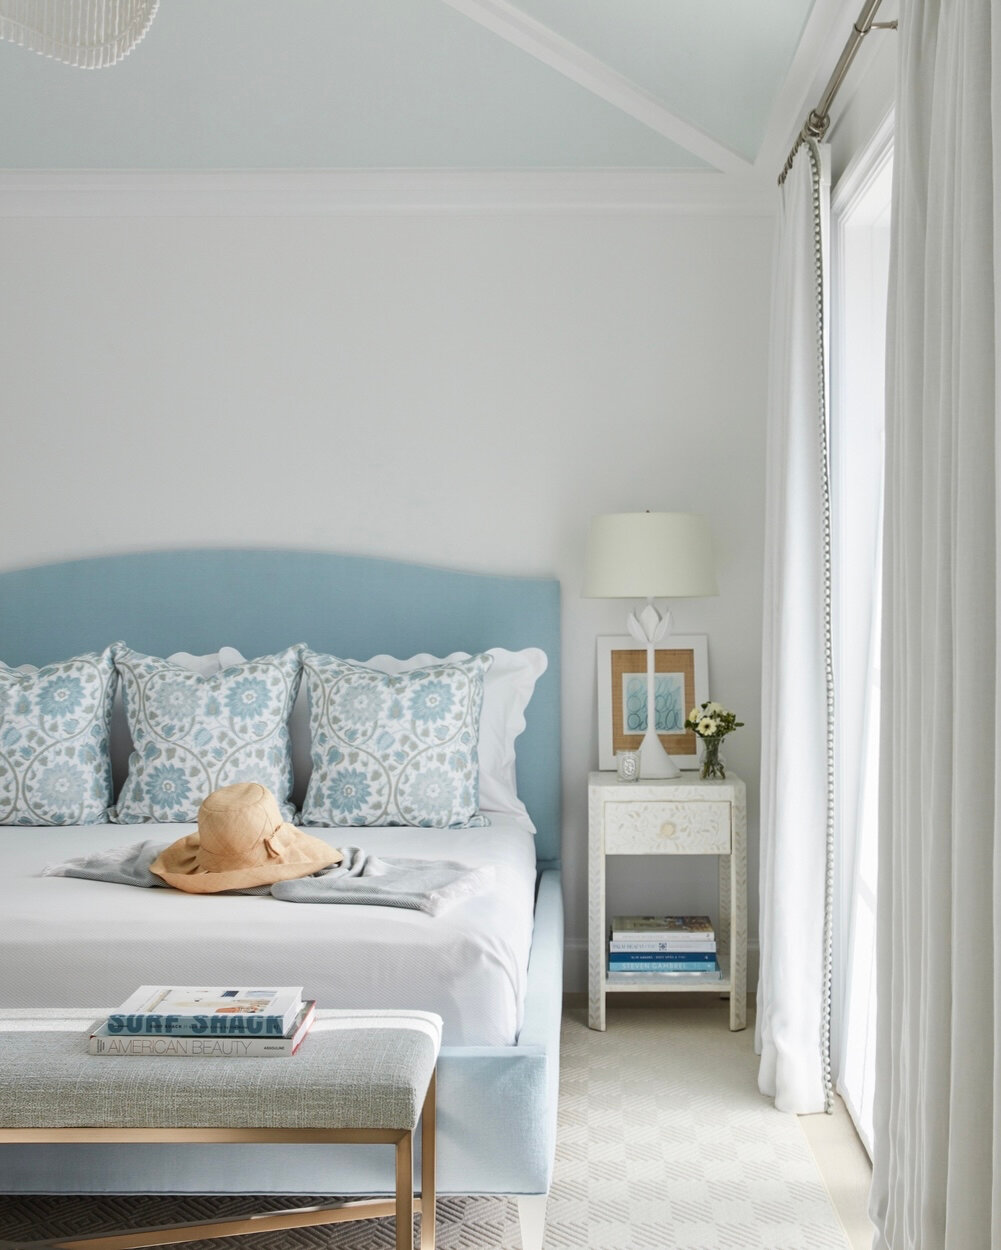 We loved working with @caitlinkah on this light-filled, cheerful guest room; the soft blue tones echo the sea, less than a block away.​​​​​​​​
​​​​​​​​
 📸: @brantleyphoto